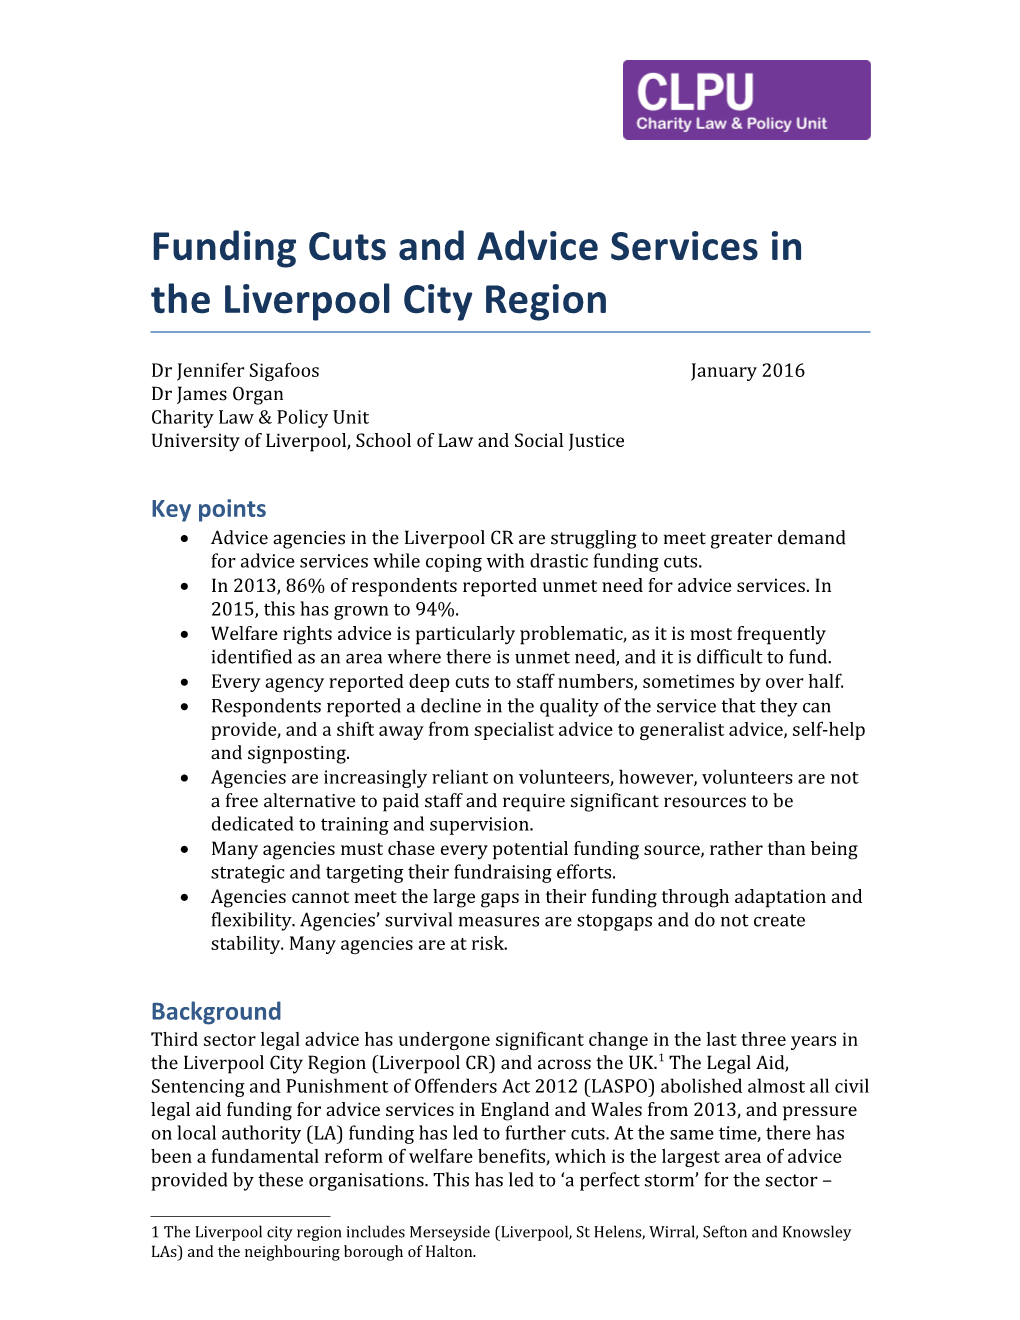 Funding Cuts and Advice Services in the Liverpool City Region